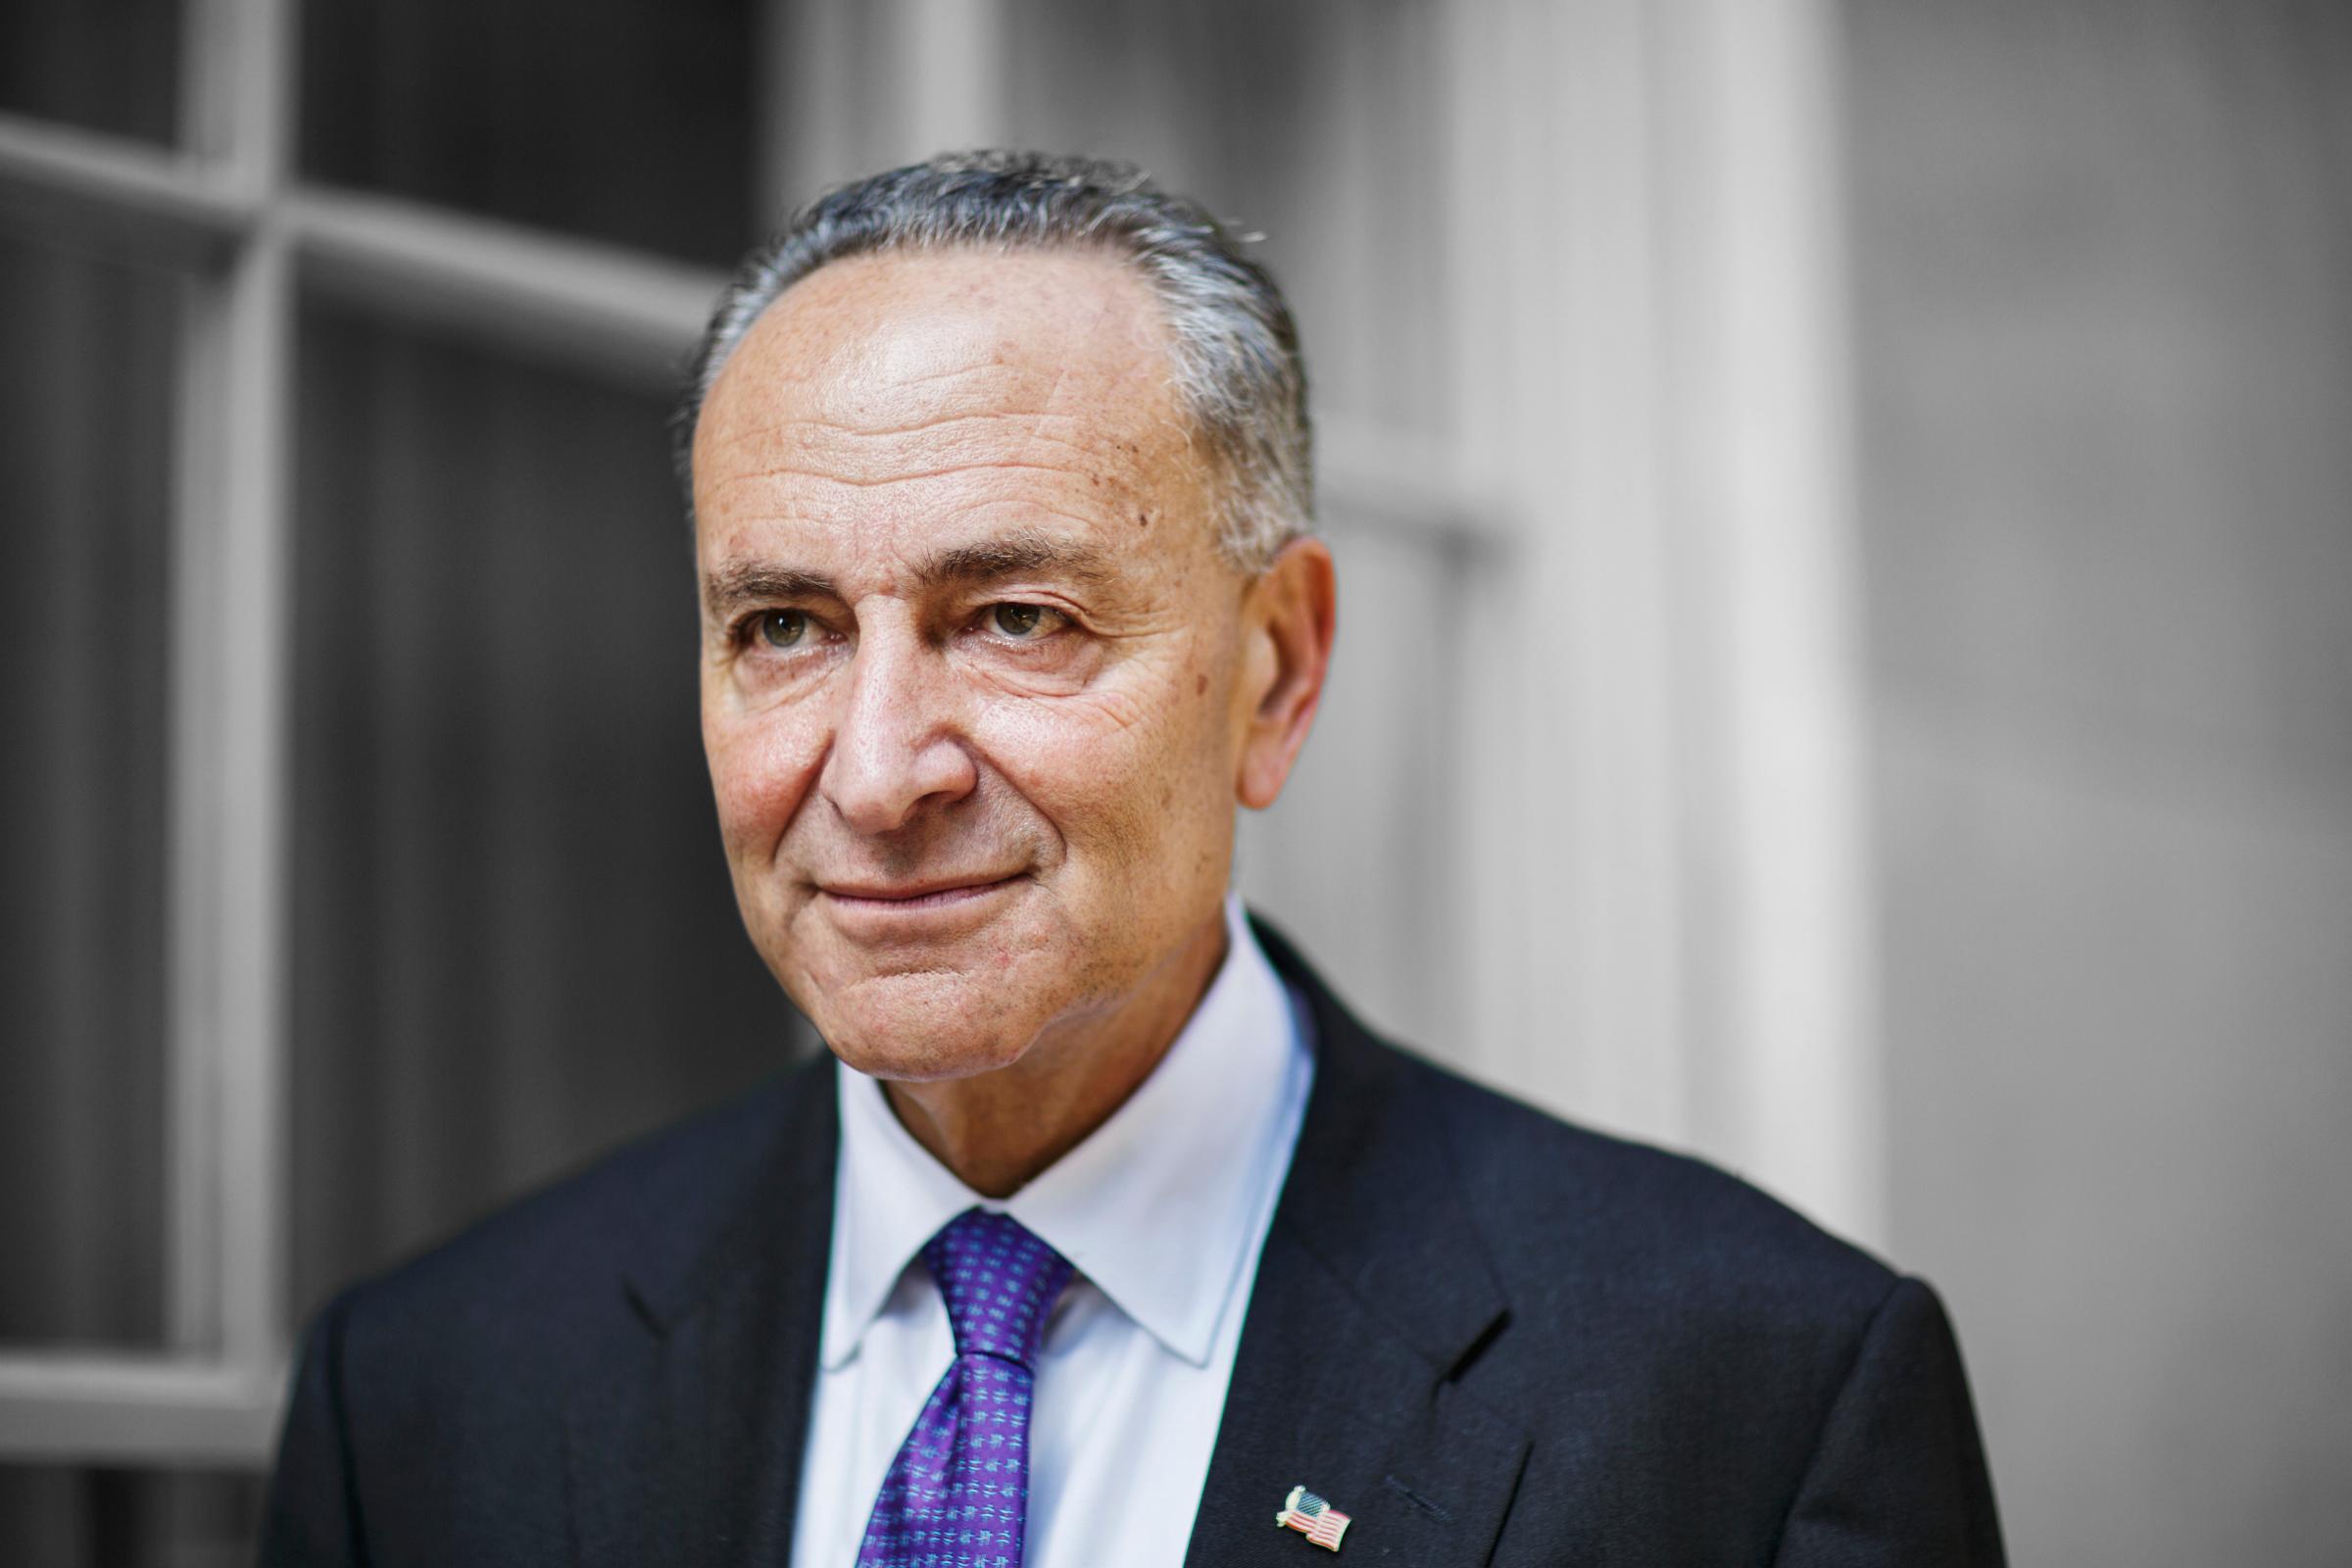 Chuck Schumer When Senate Minority Leader Harry Reid steps down next year, the New York Democrat is his likely successor. His first order of business will be helping change that job title to Senate Majority Leader, but it's a tall order.